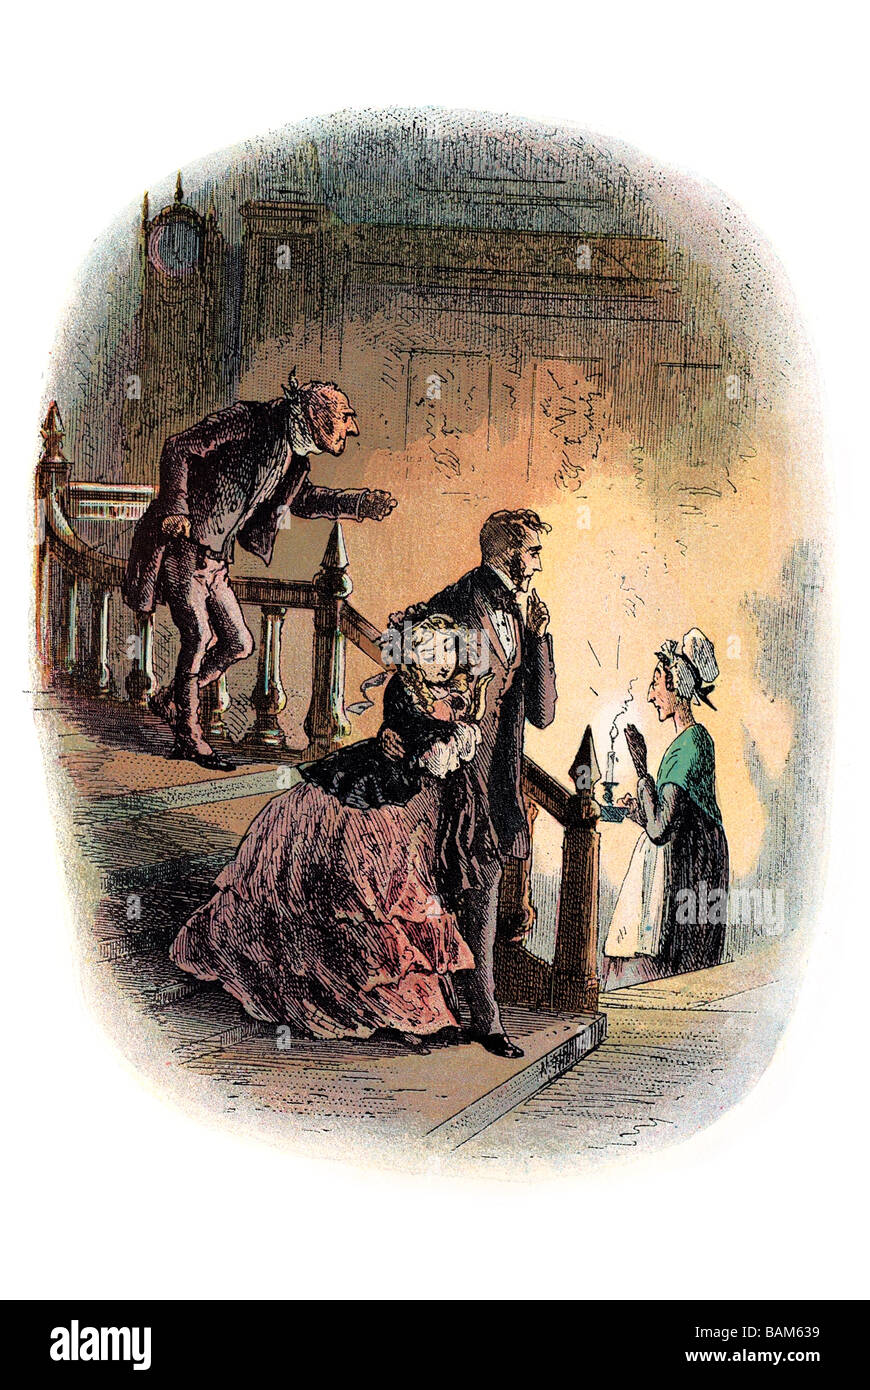 flora s tour of inspection Little Dorrit is a serial novel by Charles Dickens published originally between 1855 and 1857. Stock Photo